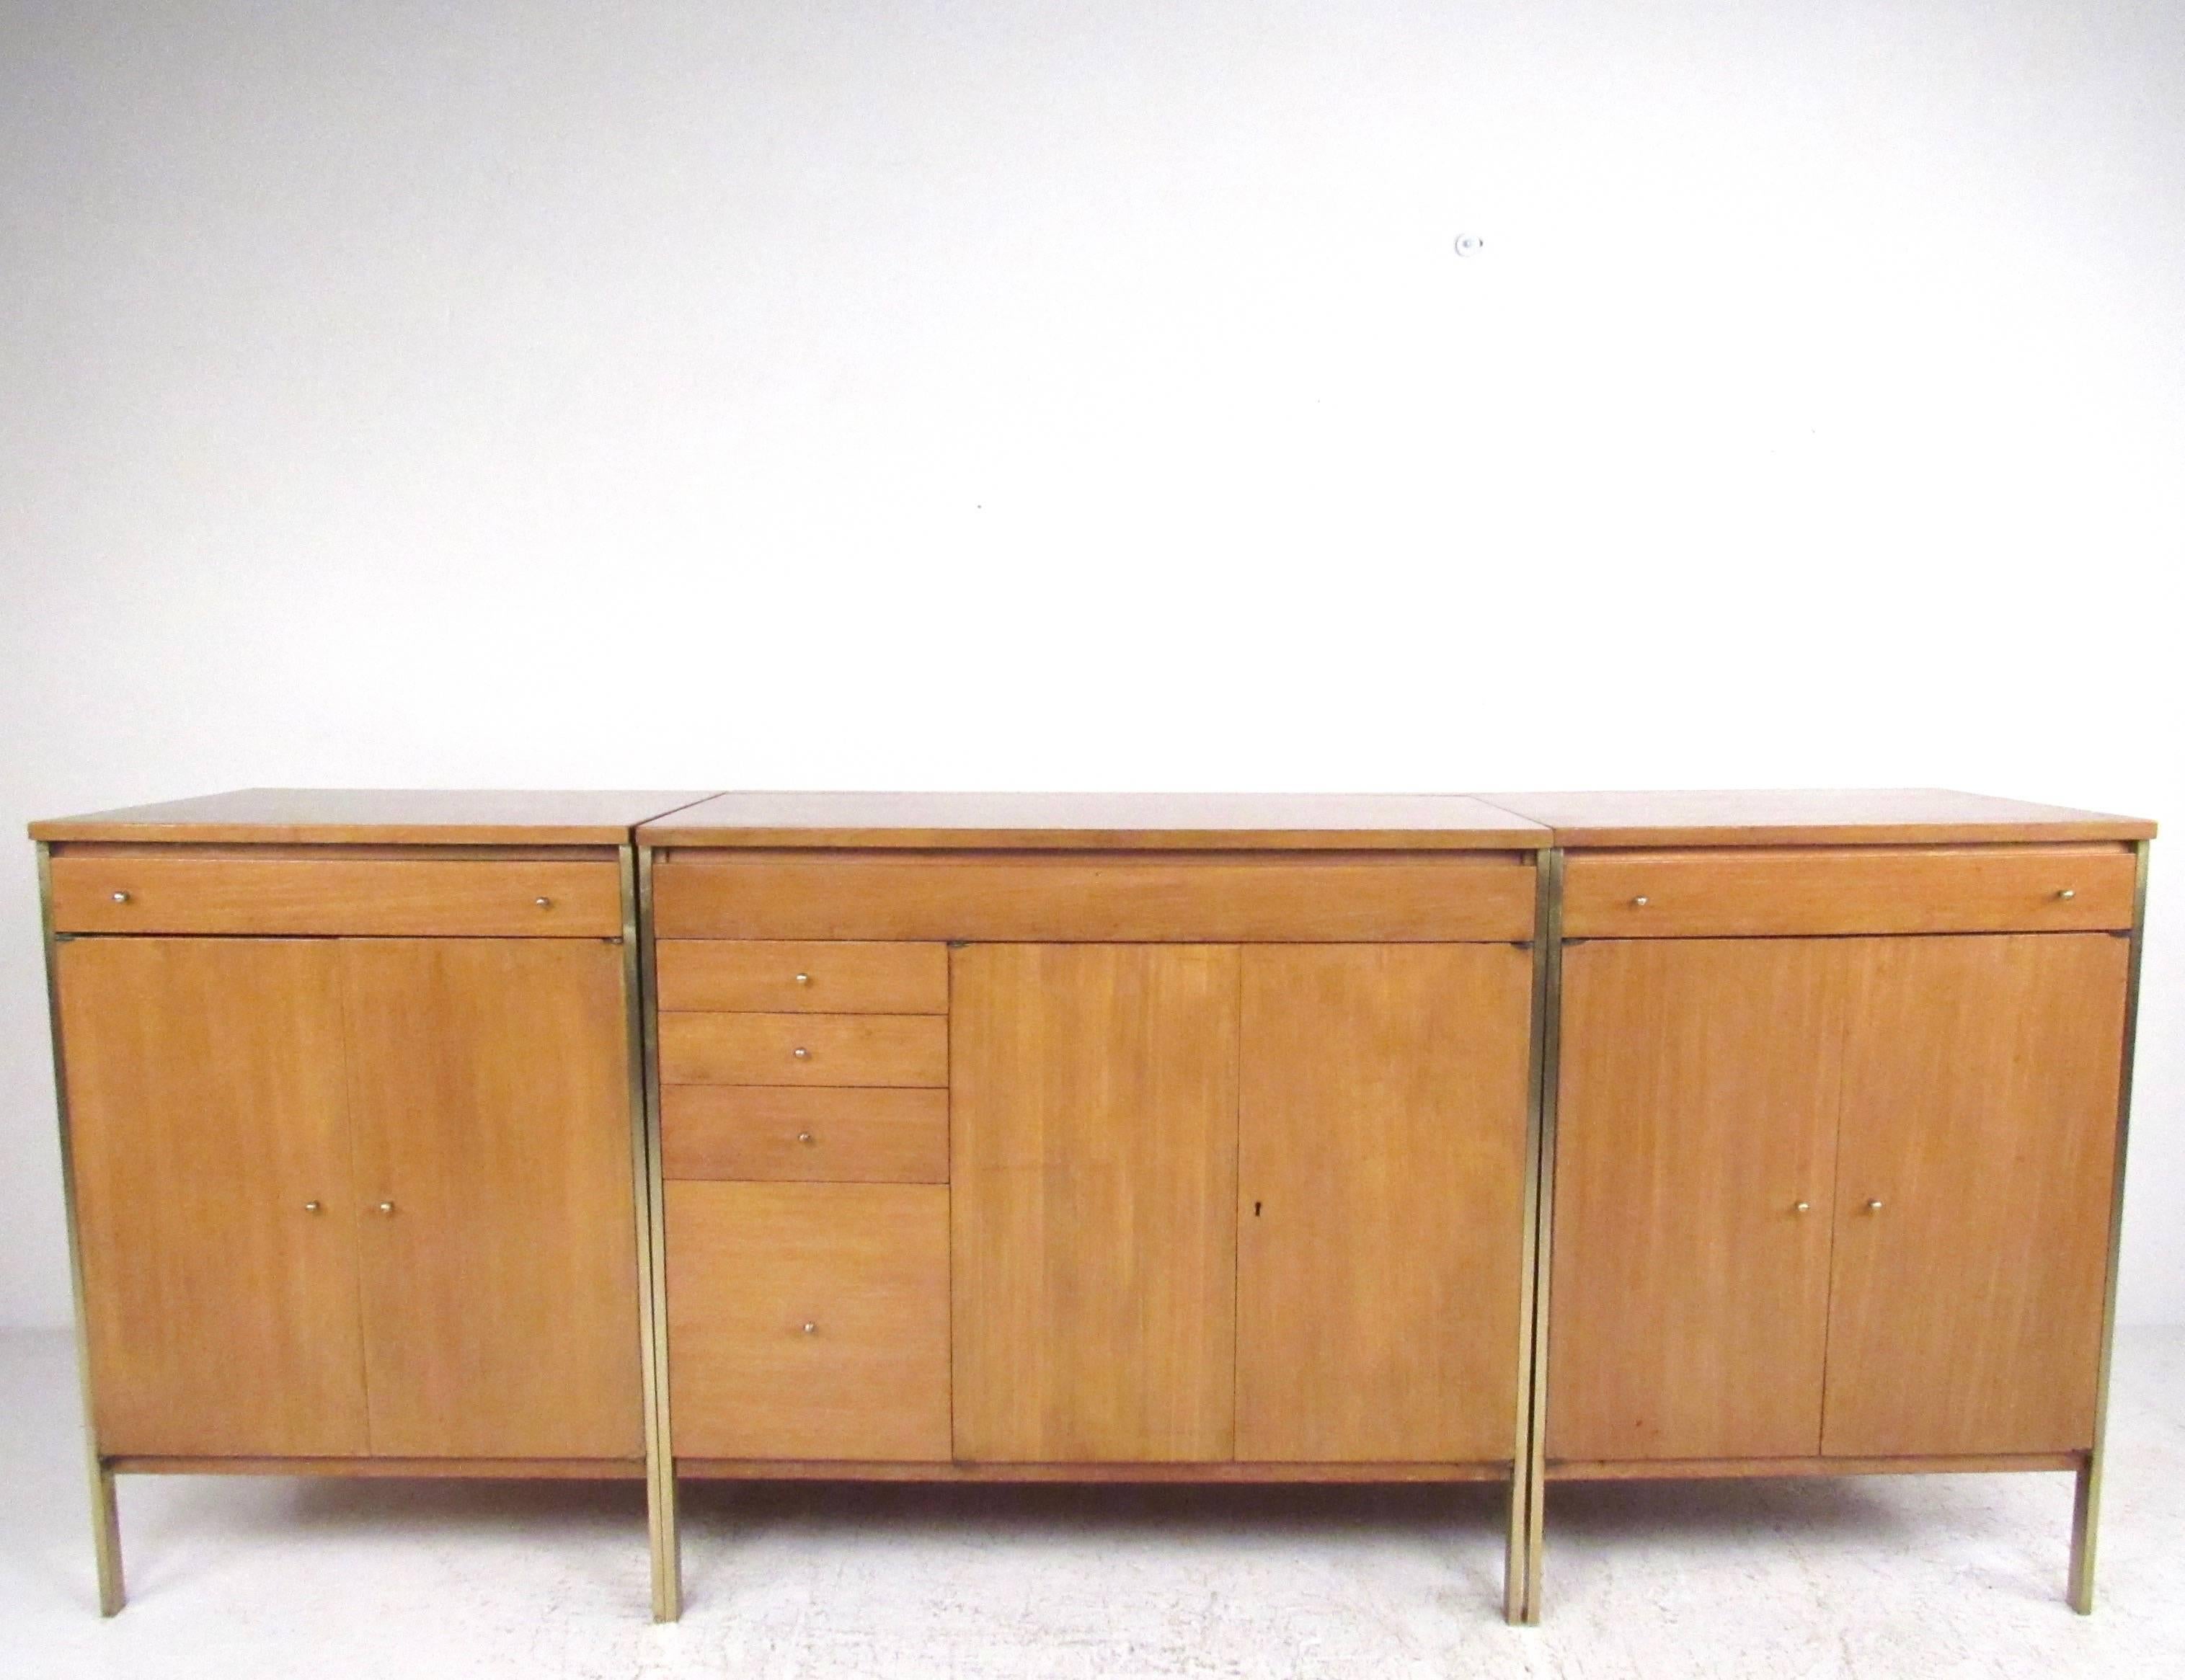 This stylish three-piece sideboard designed by Paul McCobb for H. Sacks and Son as part of the Connoisseur collection is rarely found as a set. Rich natural wood finish, brass trim, and iconic McCobb drawer pulls add to the mid-century style of the